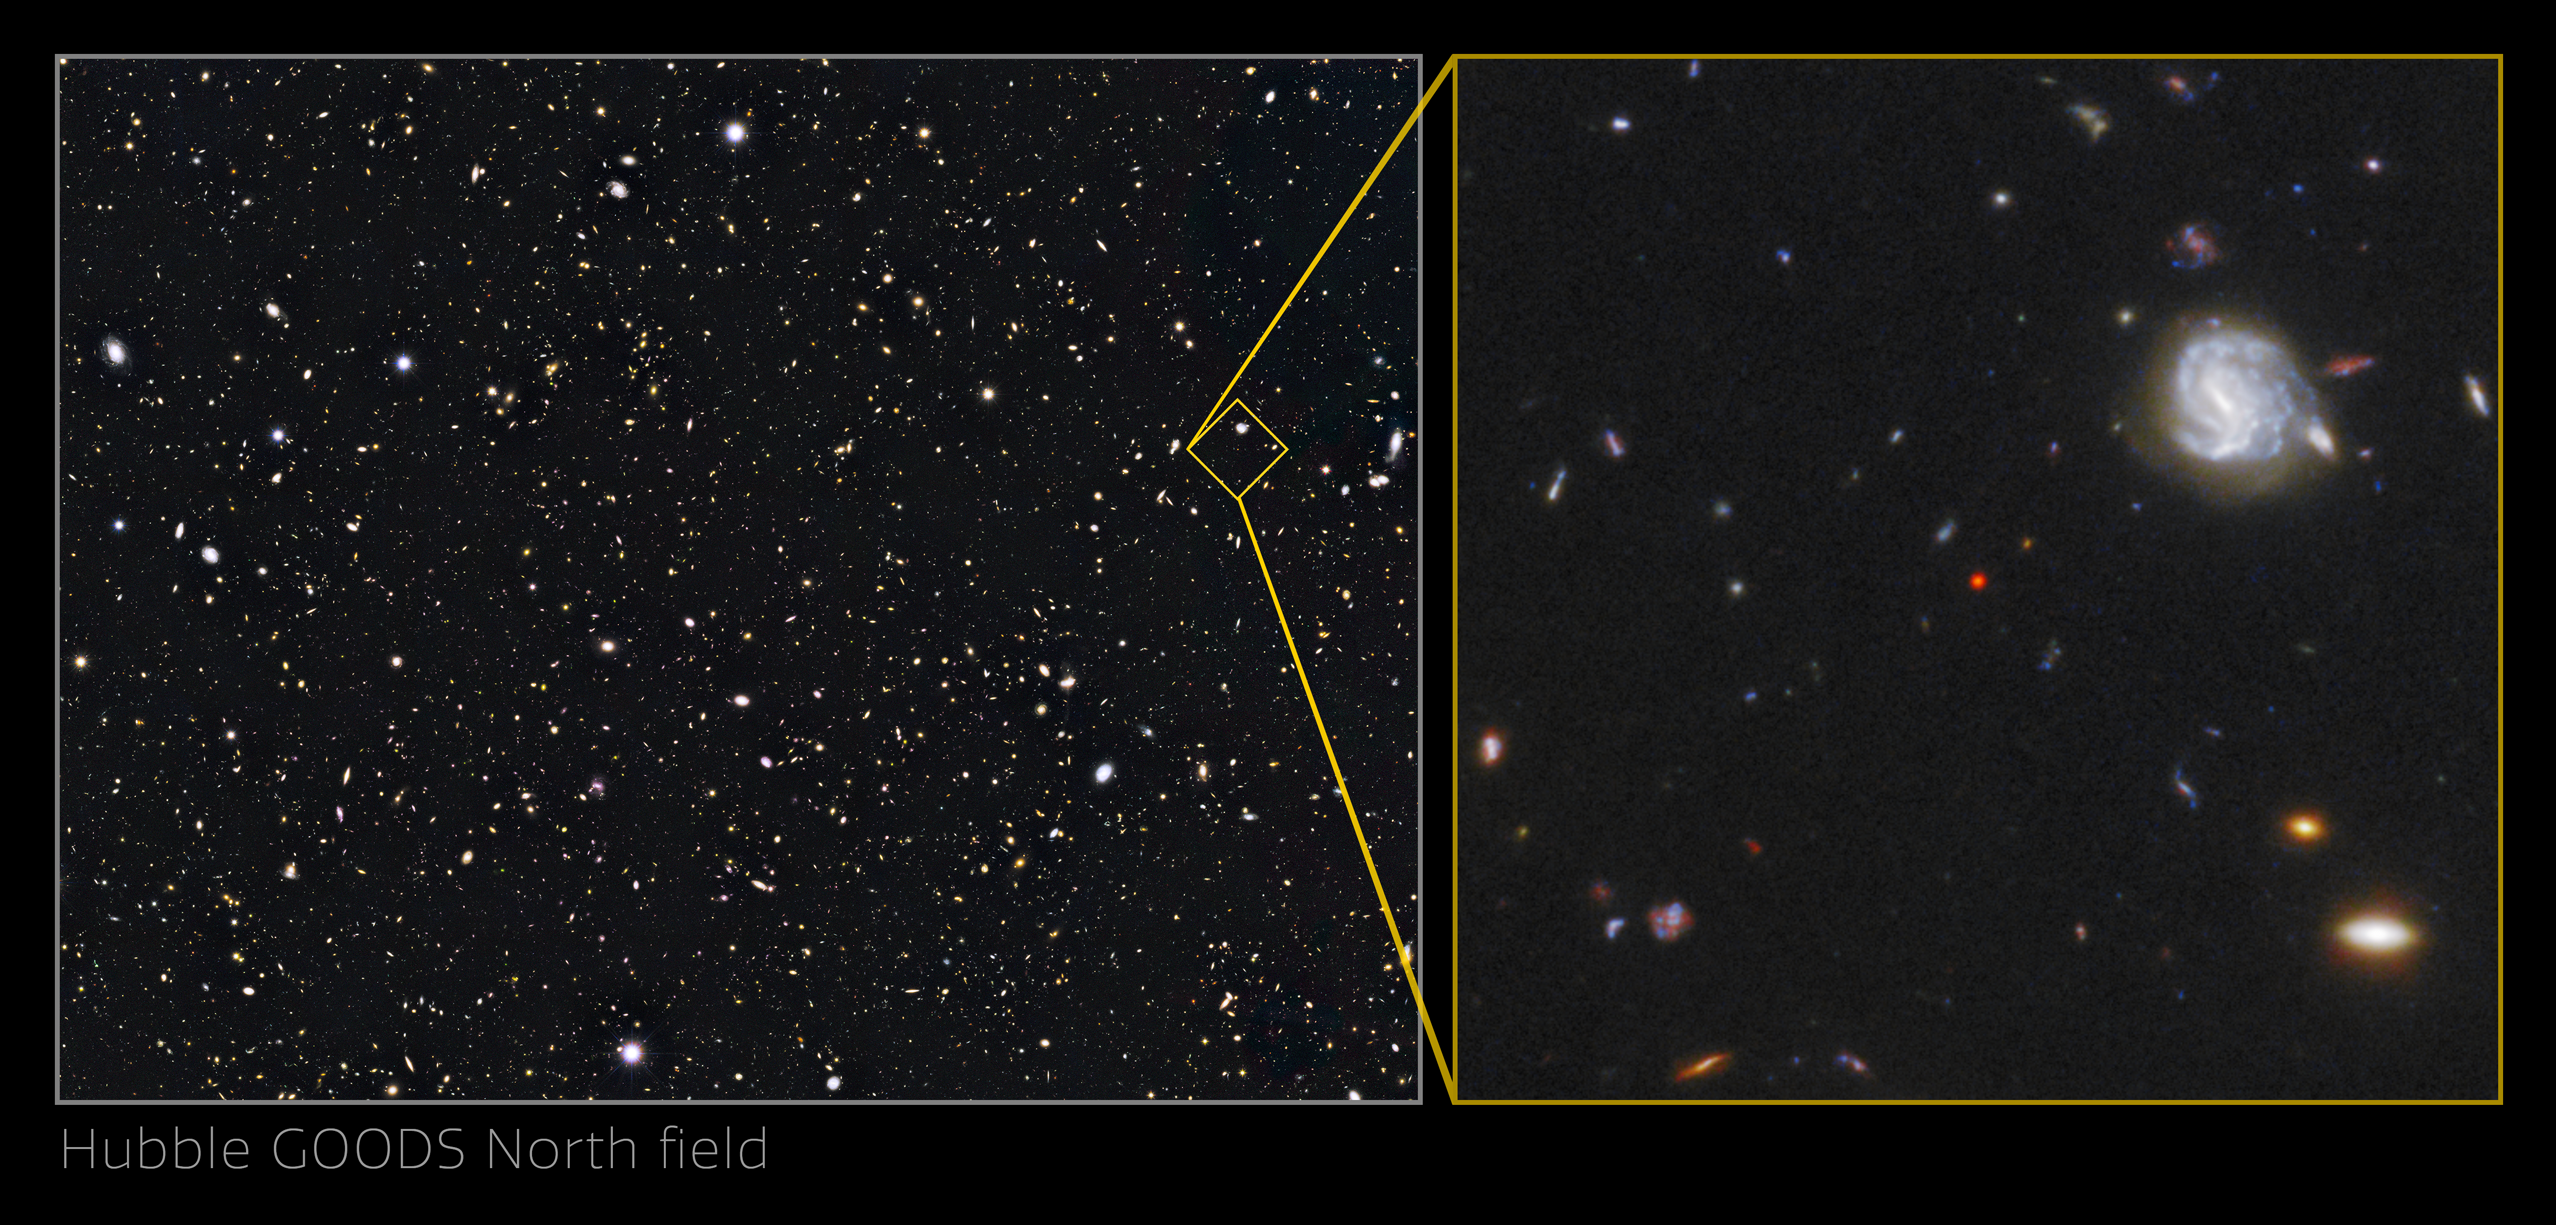 Left: Hubble GOODS North Field, Deep Field image. Right: small section of the left image expanded showing galaxies with a red dot at the center.